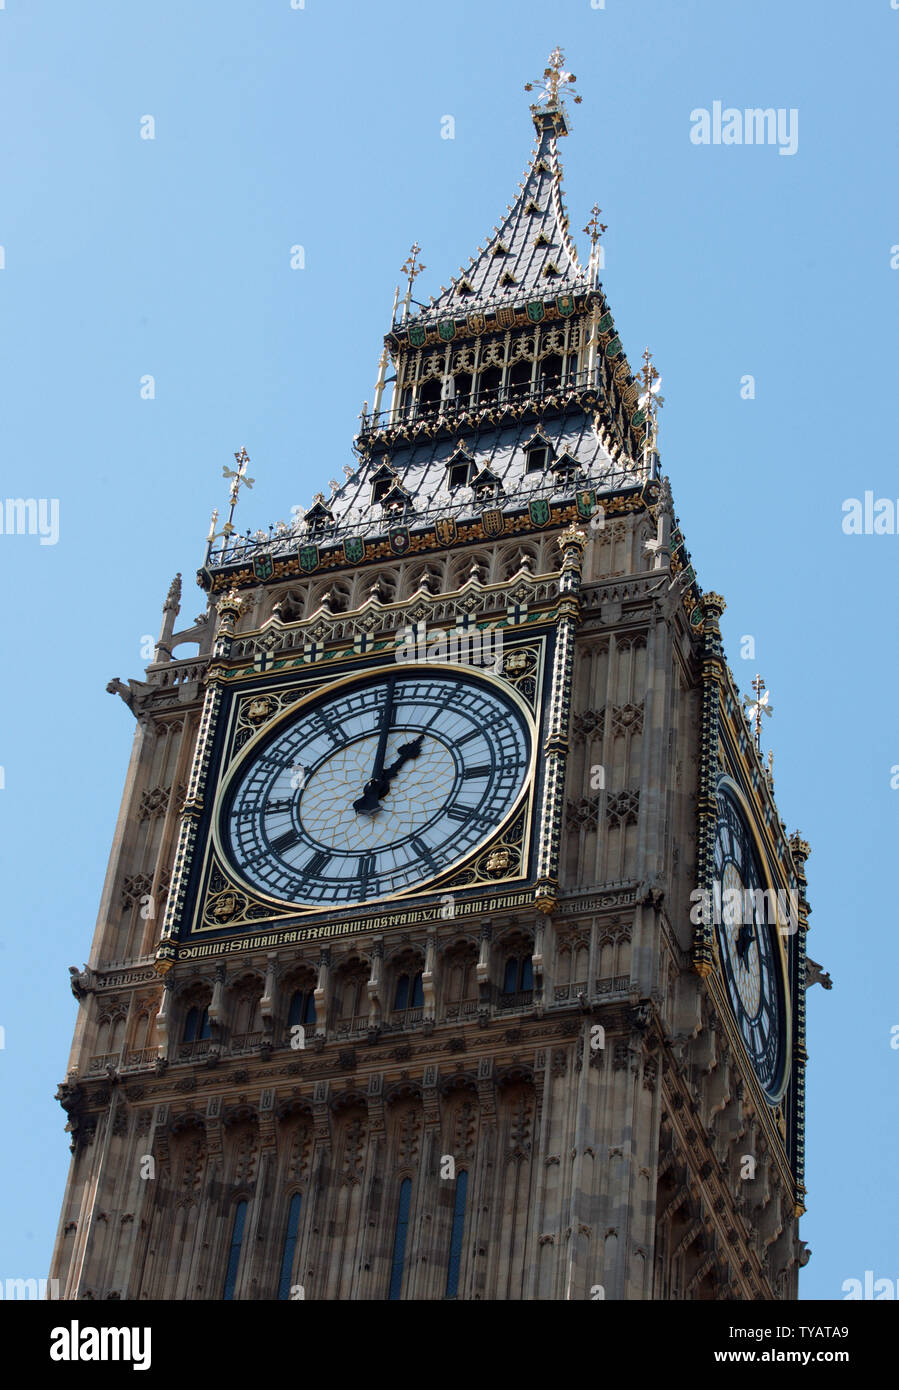 The face of clock Big Ben is seen on the eve of its 150th birthday in  London on May 30, 2009. Big Ben is the biggest chiming clock tower in the  world